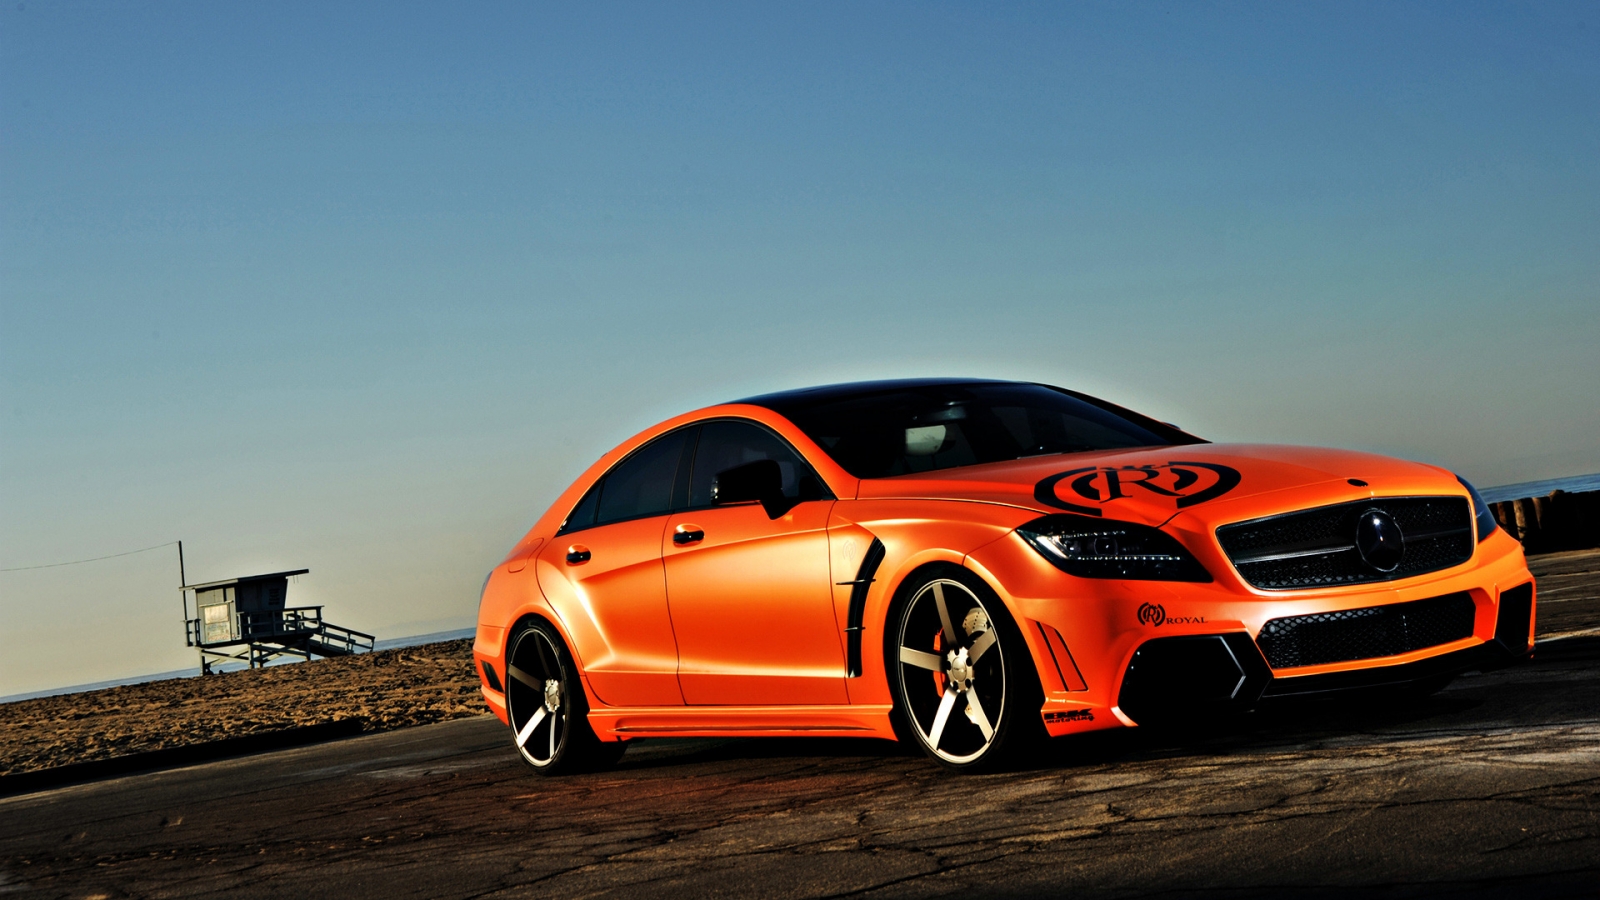 Mercedes CLS 63 AMG Tuning for 1600 x 900 HDTV resolution